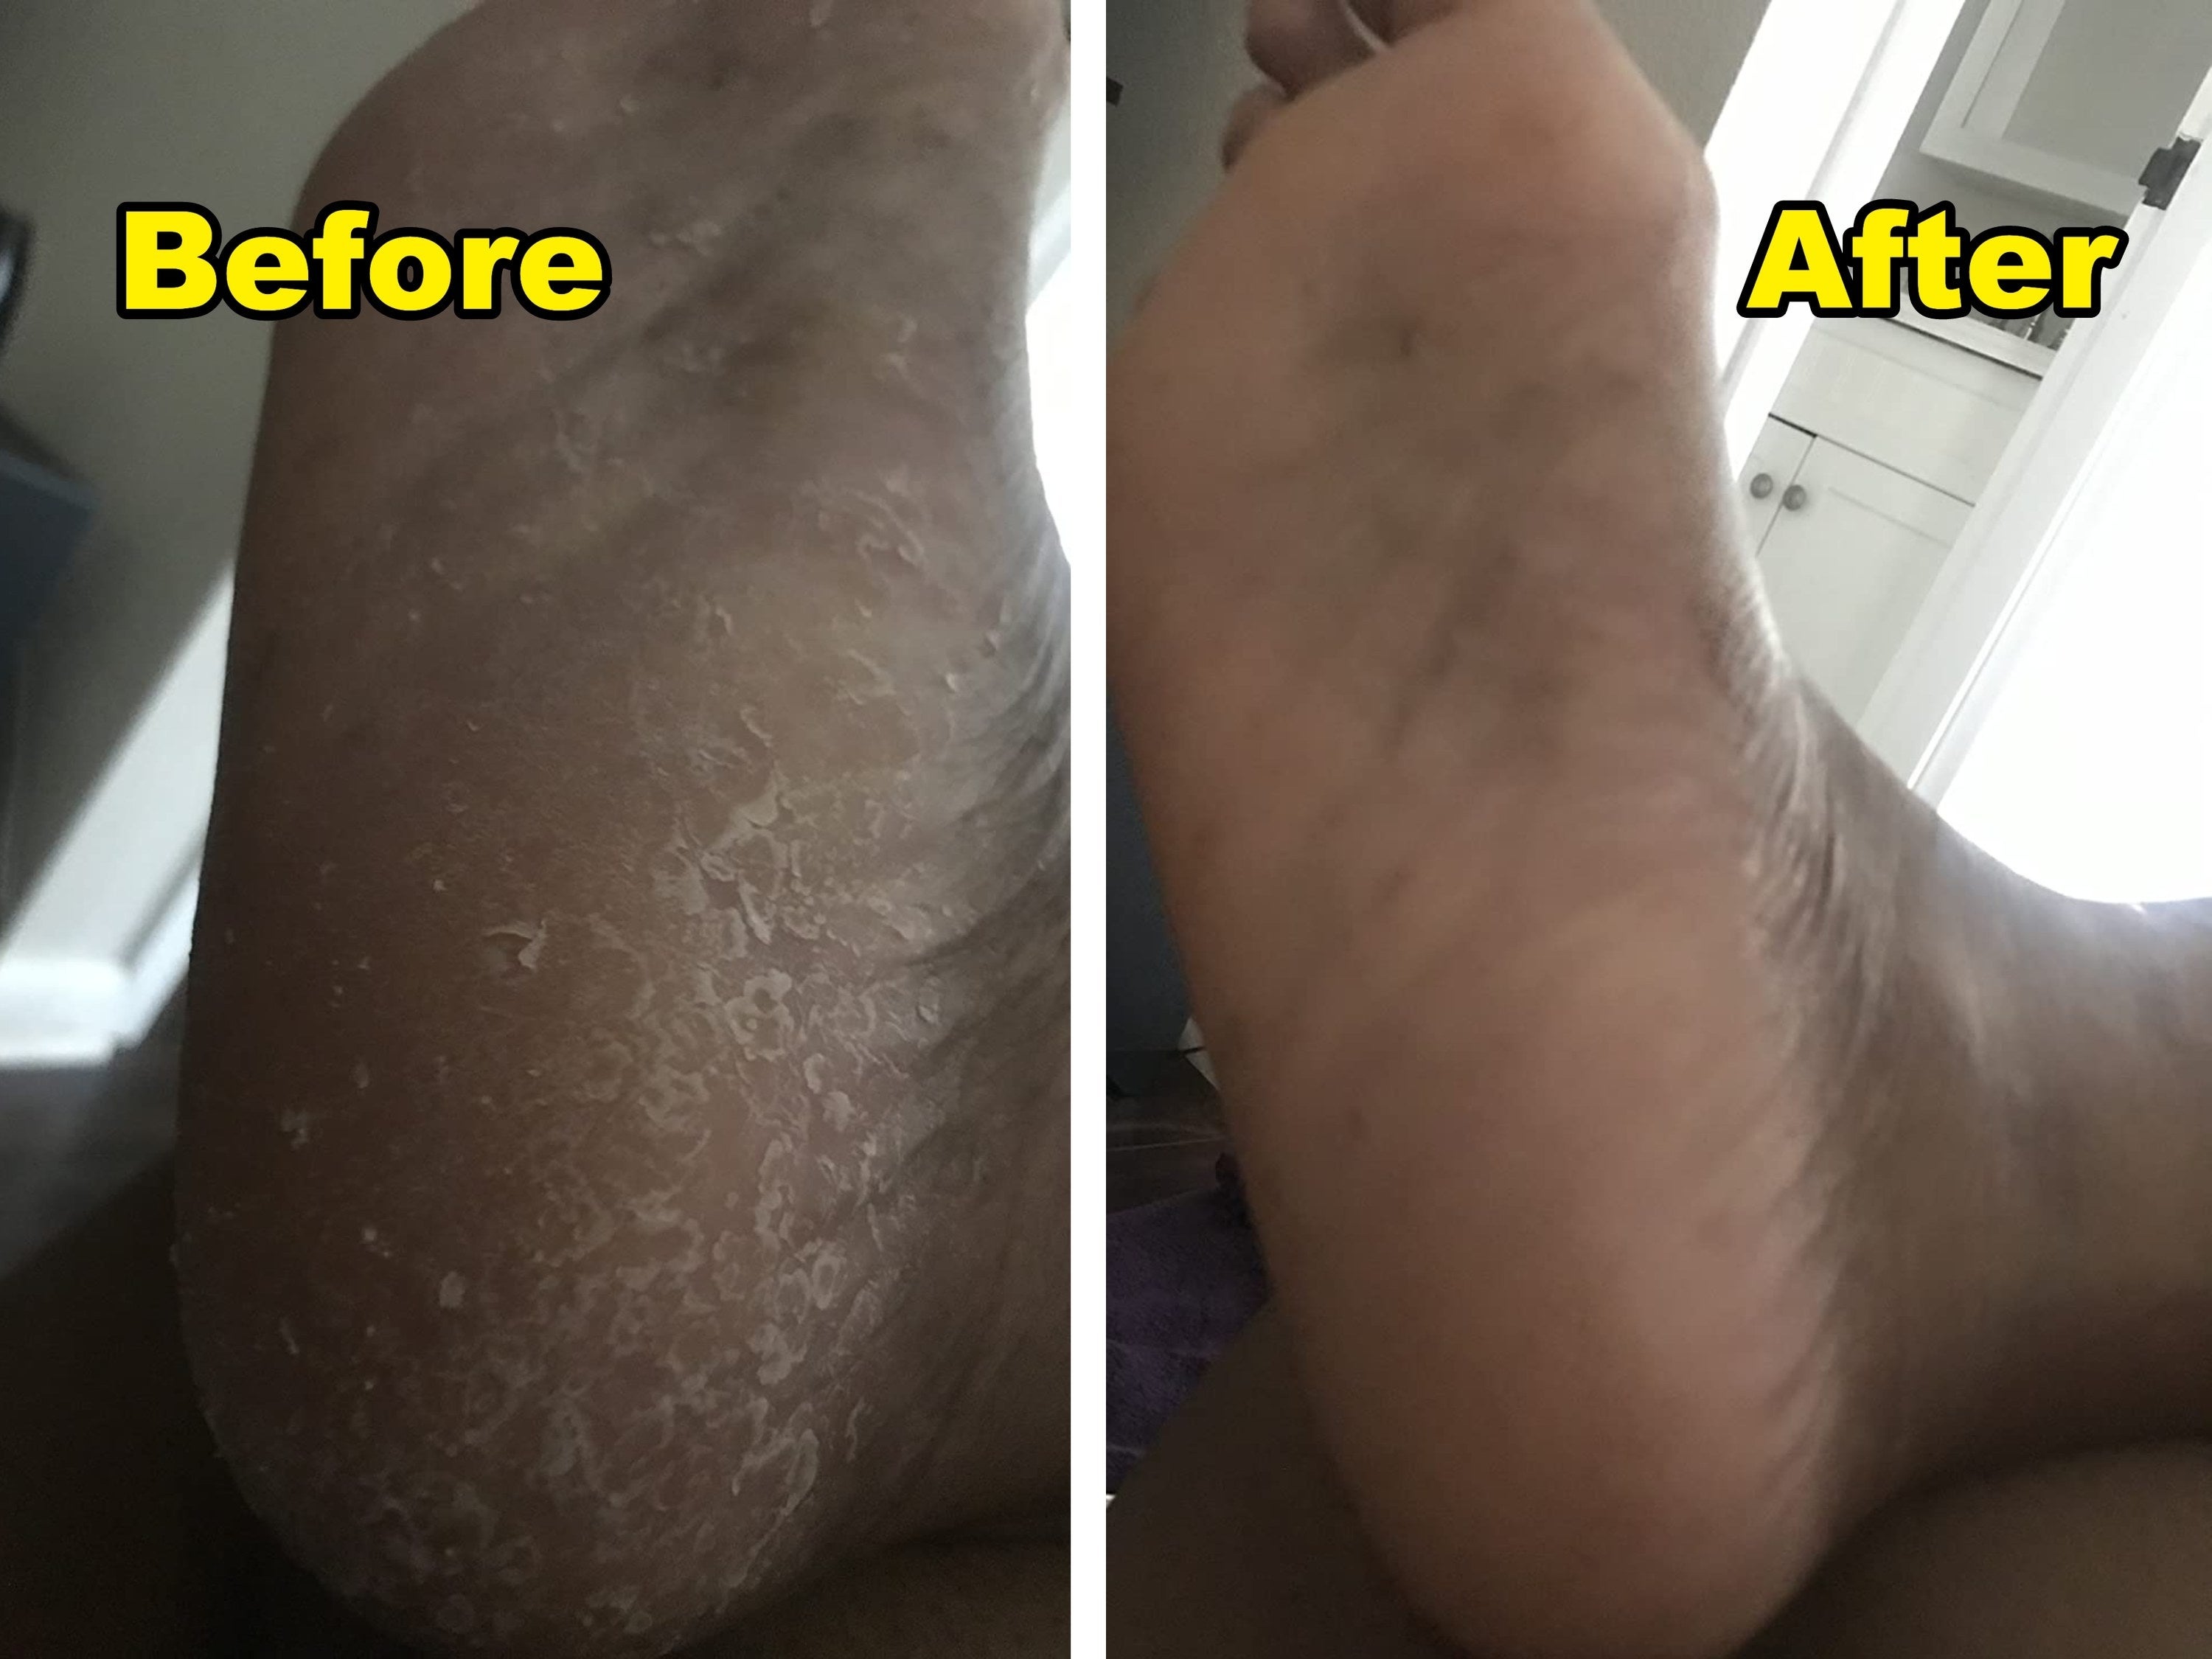 a split before and after image of a reviewers foot looking dry and cracked and the same foot looking moisturized 